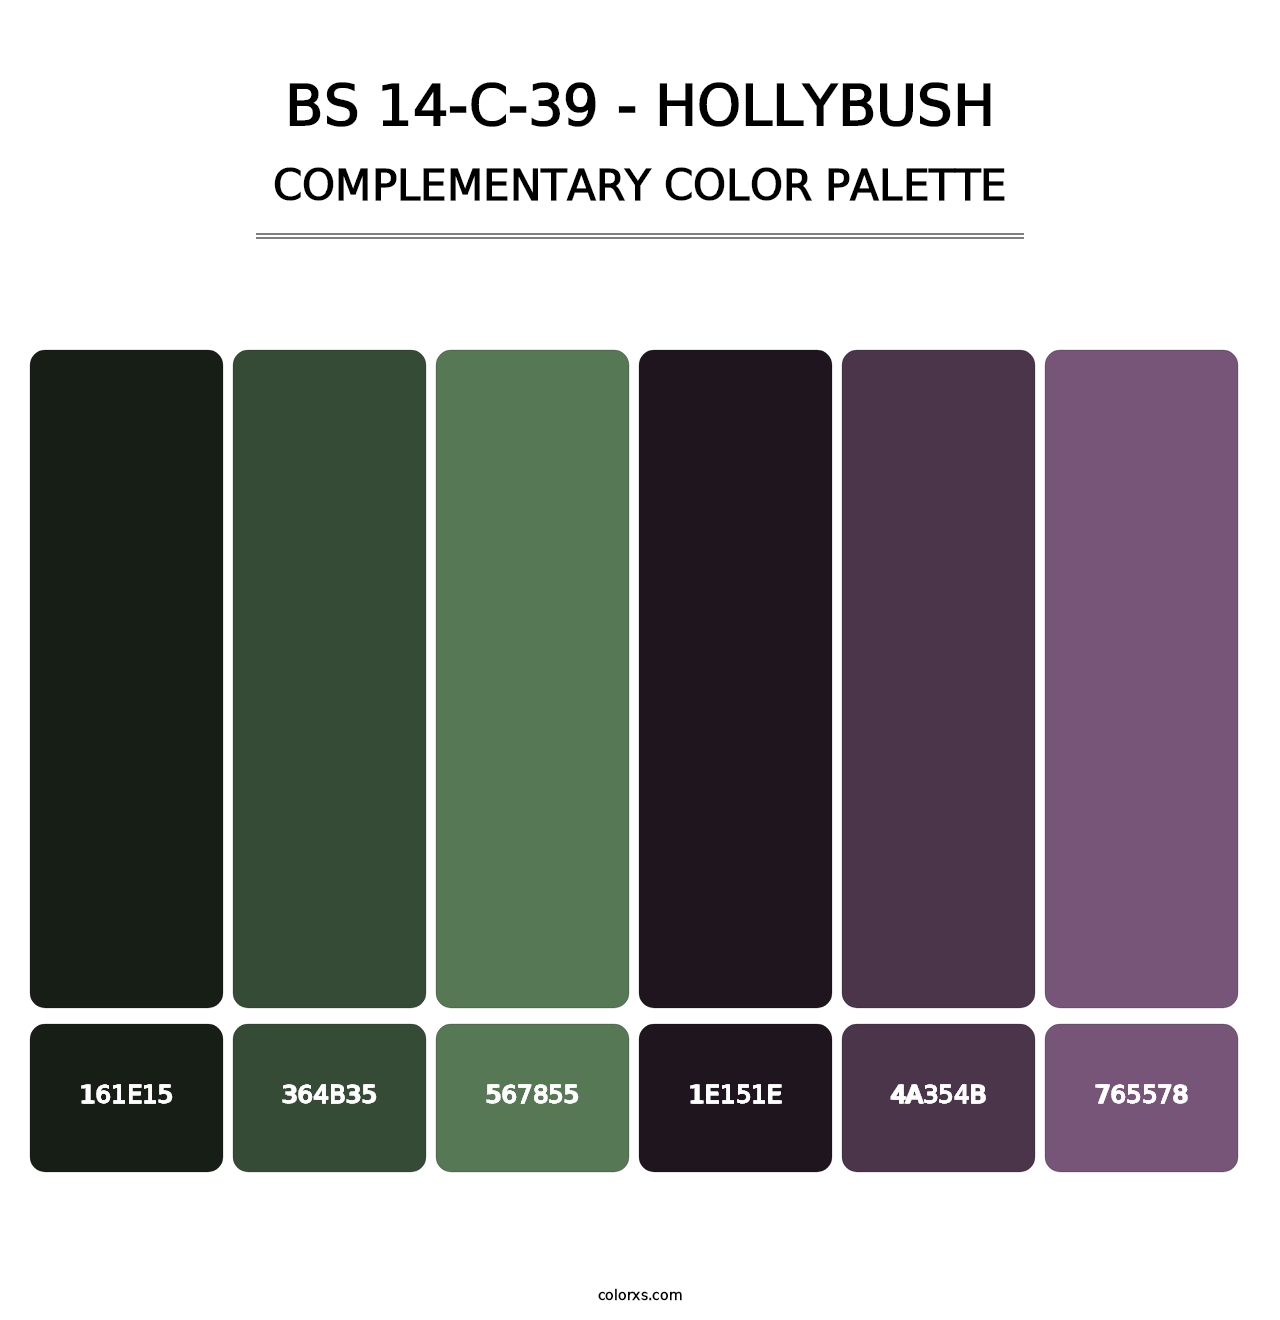 BS 14-C-39 - Hollybush - Complementary Color Palette